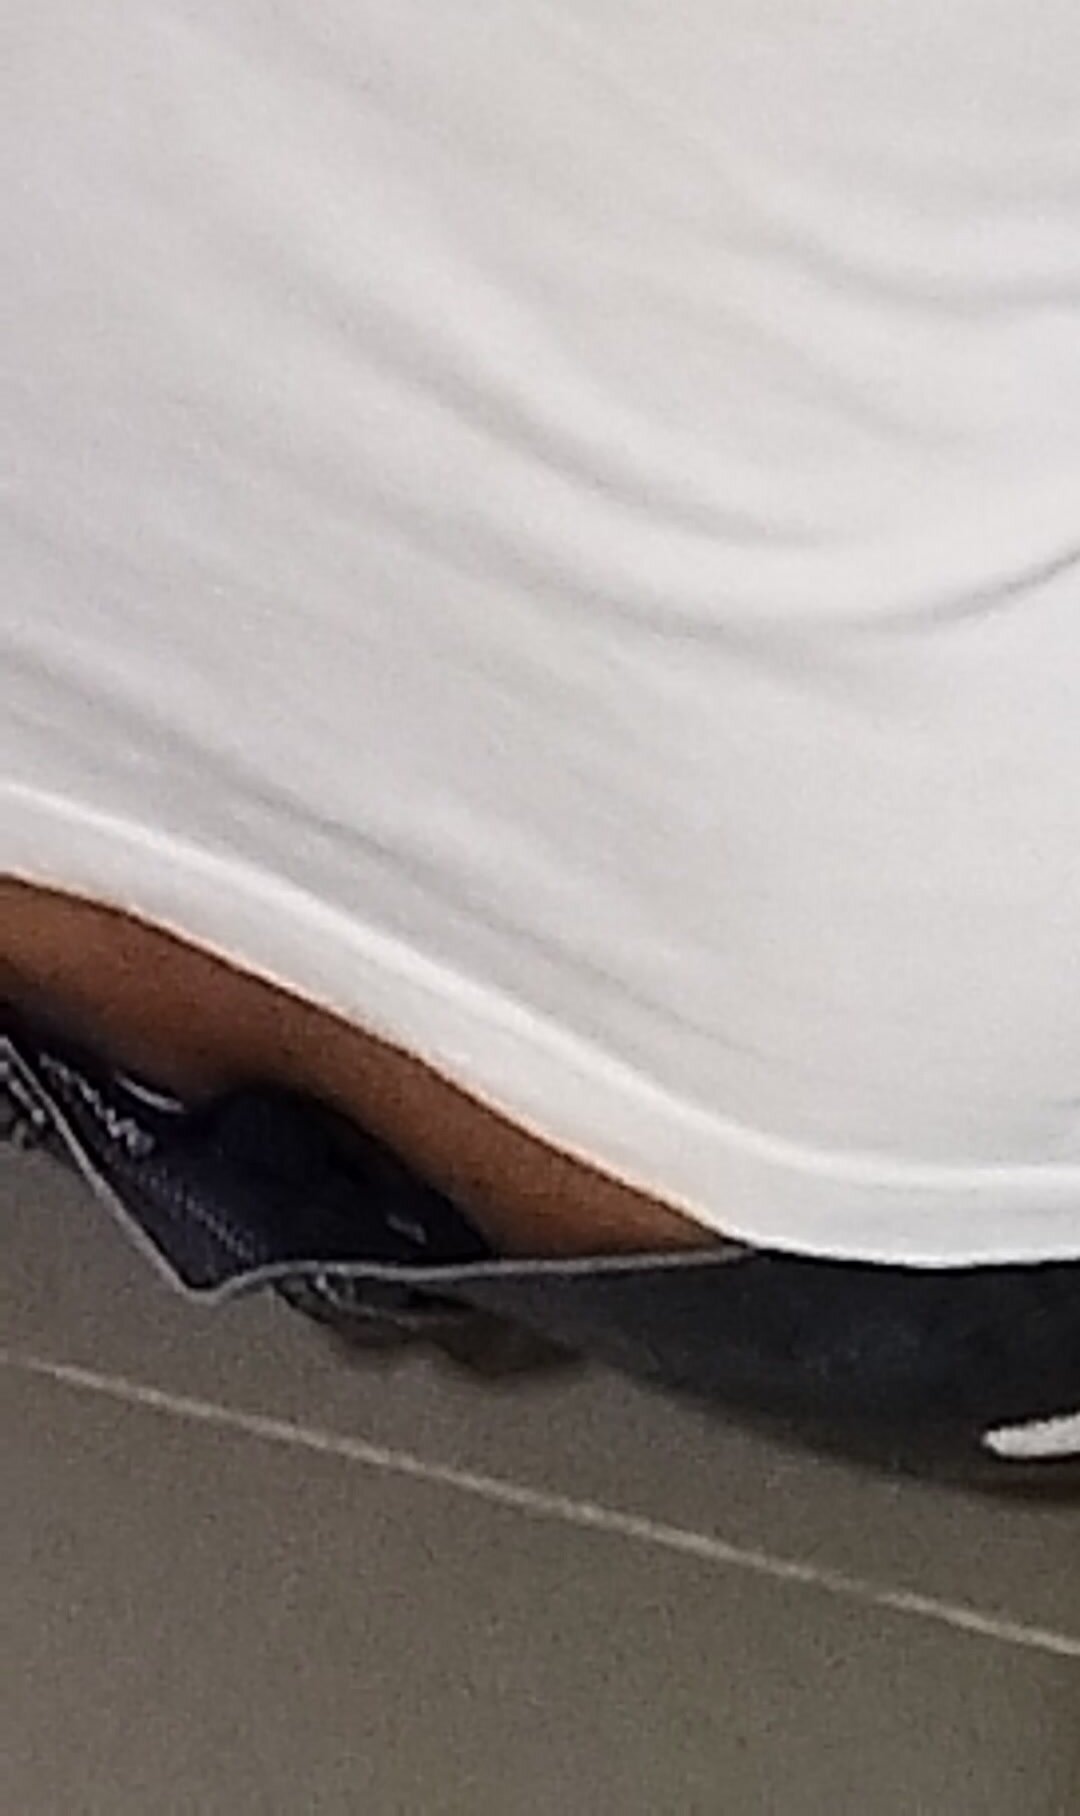 this daddy is teasing me with his butt crack